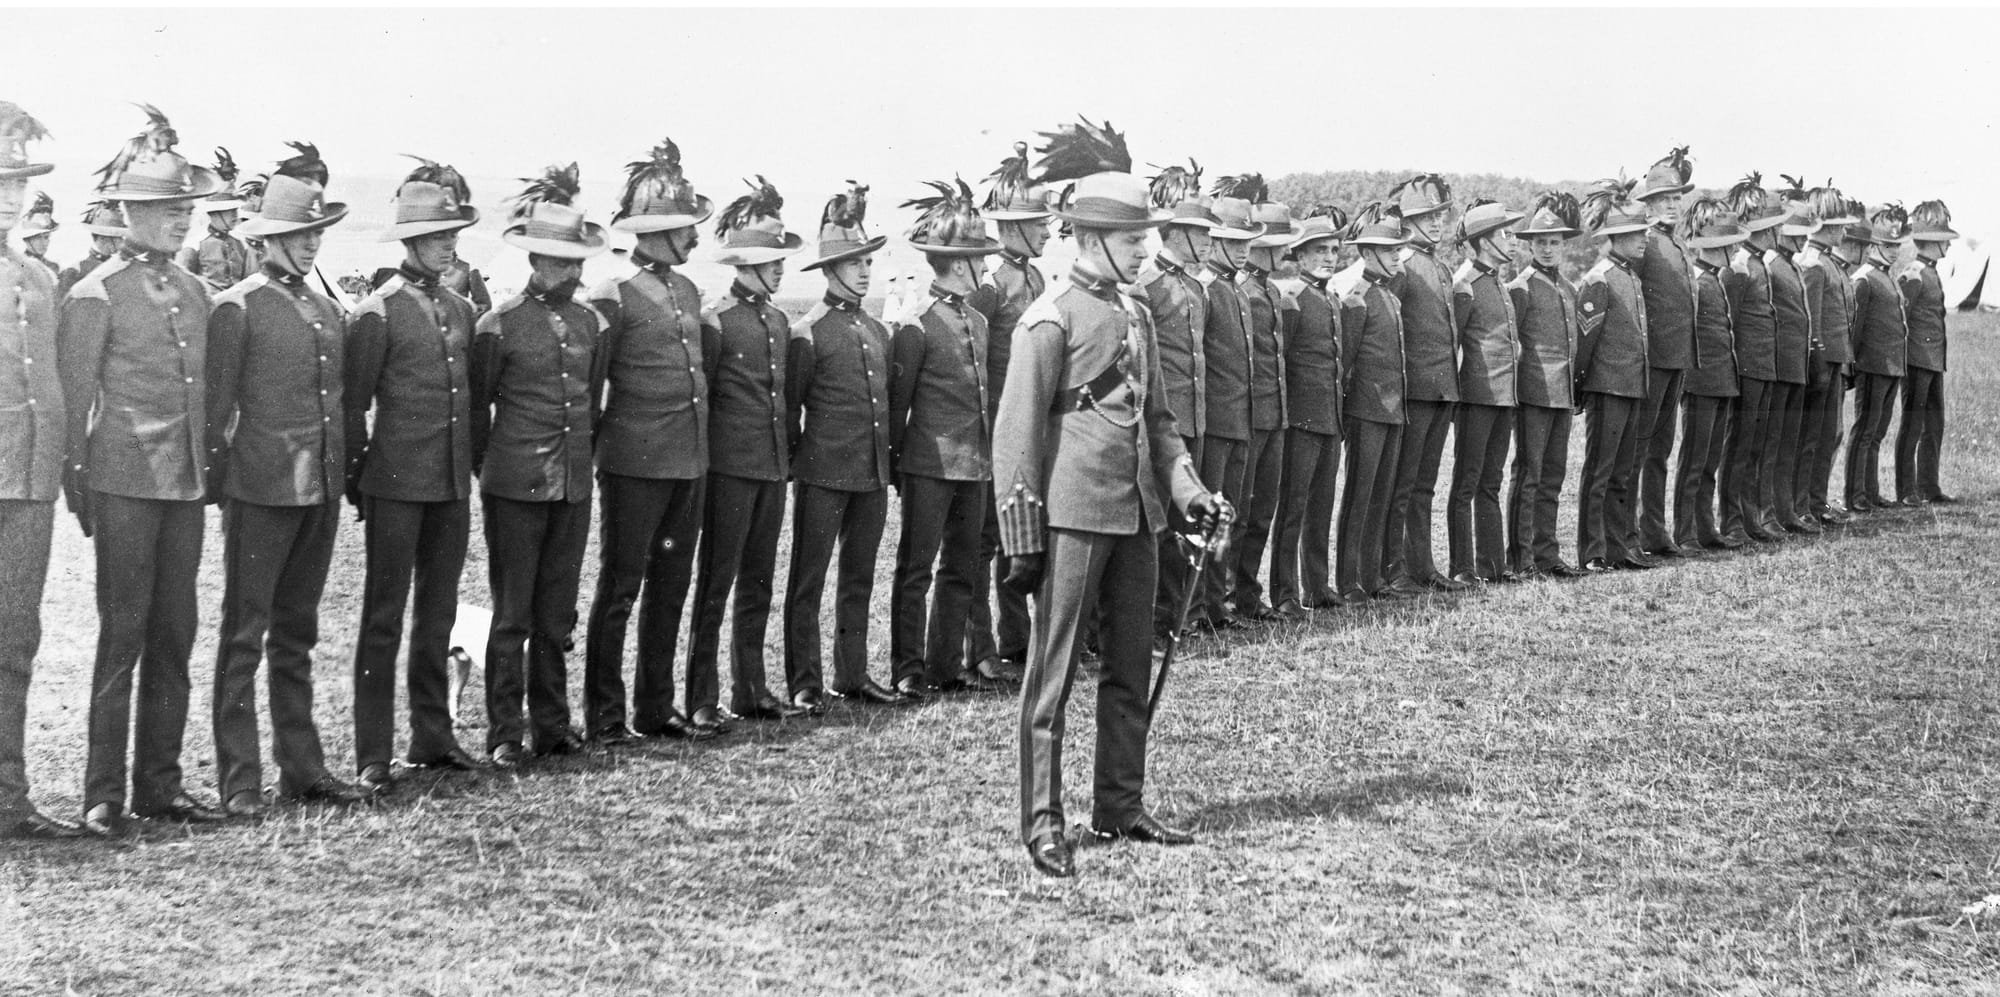 Full Dress uniform including Second Pattern headdress of an Officer and Other Ranks of ‘C’ Squadron (Australian) on church parade of the King’s Colonials Imperial Yeomanry circa 1905-06. The Officer and Other Ranks are wearing ‘C’ Squadron (Australian) headdress and collar badges (R. J. Smith collection).